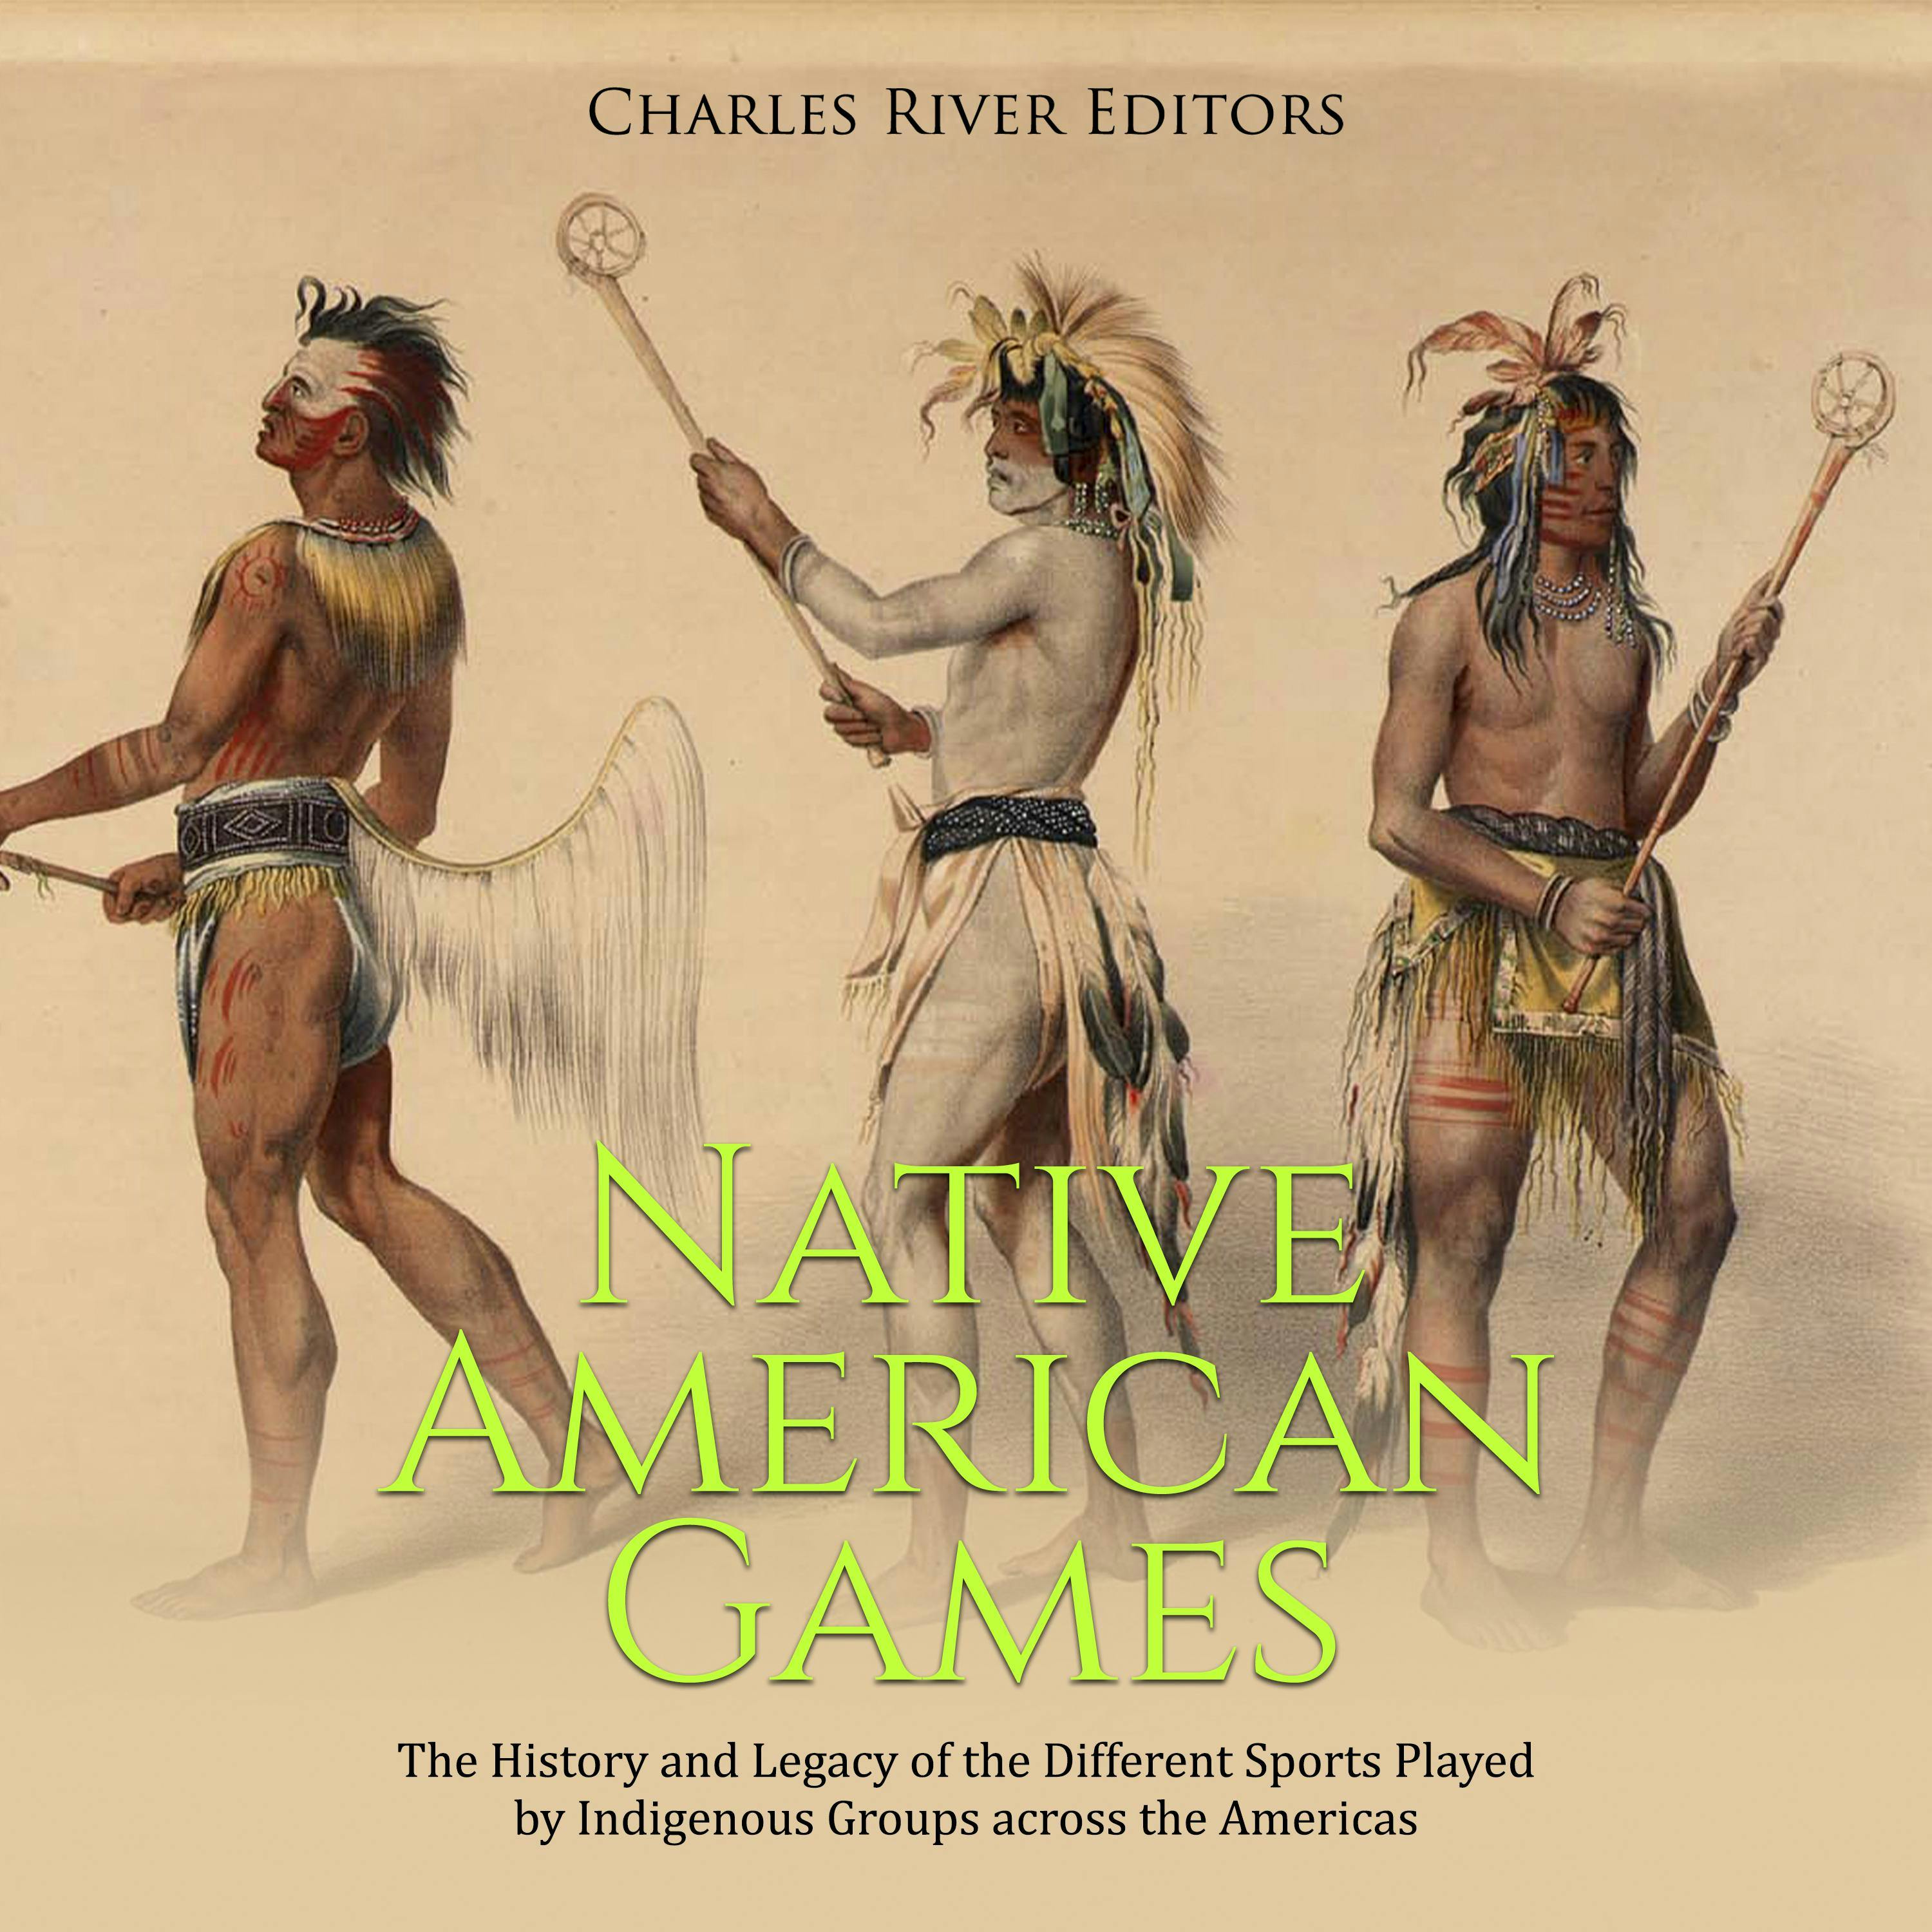 Native American Games: The History and Legacy of the Different Sports Played by Indigenous Groups across the Americas - Charles River Editors